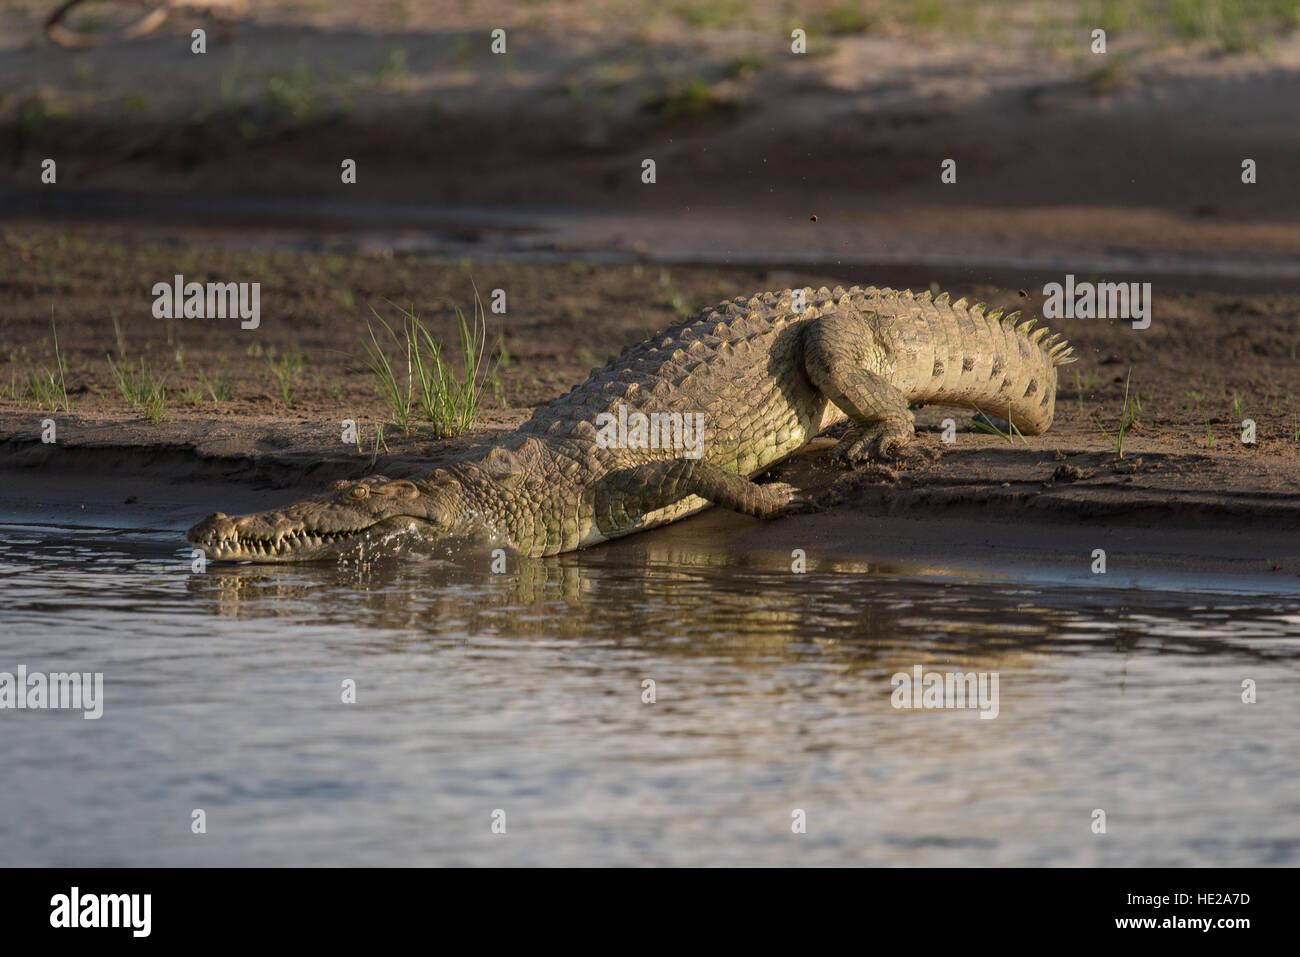 Nile crocodile going back to the water in the Selous game rerserve. The river is the Rufiji river. Stock Photo